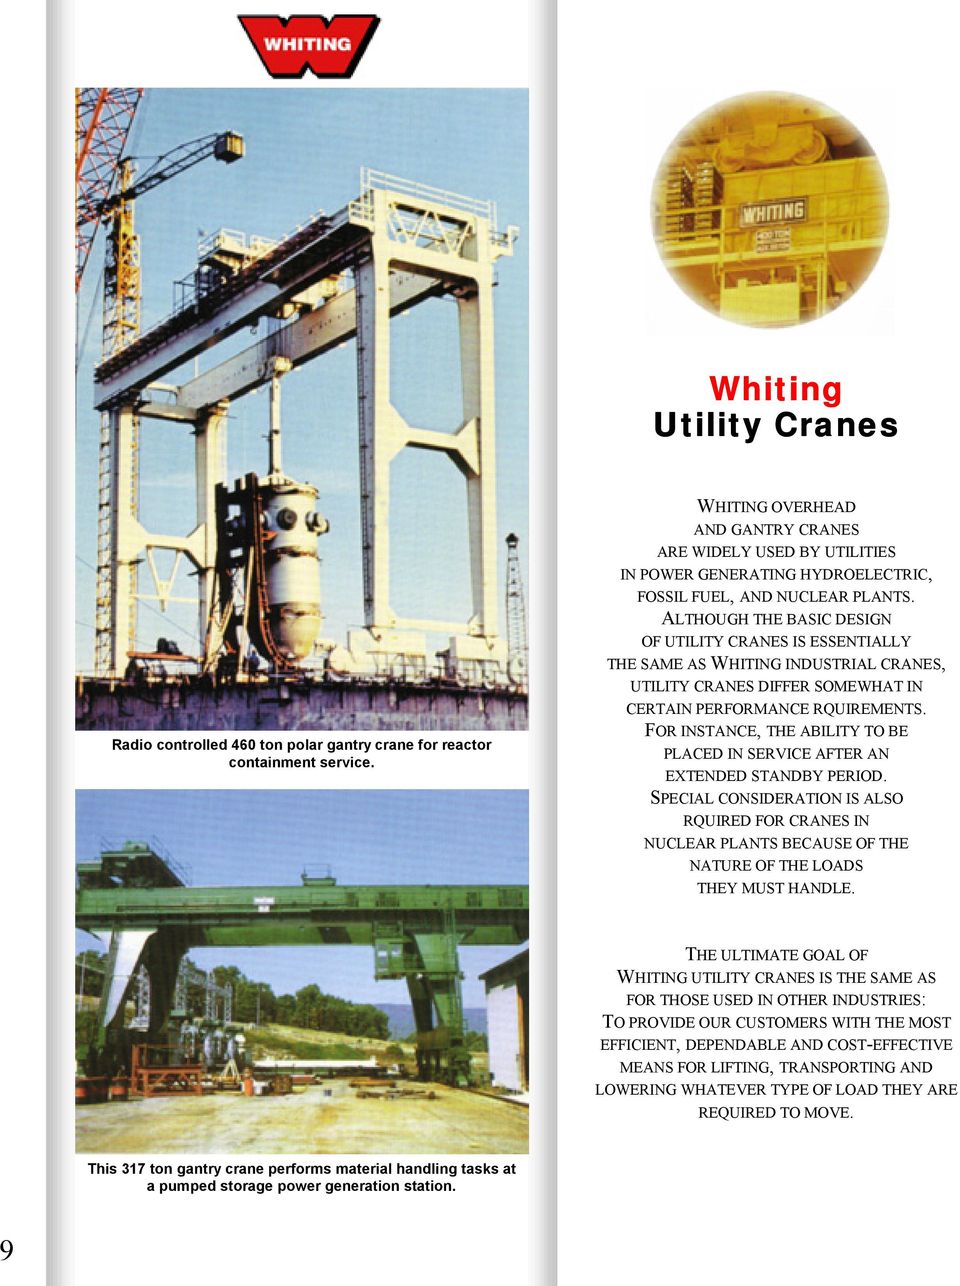 ALTHOUGH THE BASIC DESIGN OF UTILITY CRANES IS ESSENTIALLY THE SAME AS WHITING INDUSTRIAL CRANES, UTILITY CRANES DIFFER SOMEWHAT IN CERTAIN PERFORMANCE RQUIREMENTS.